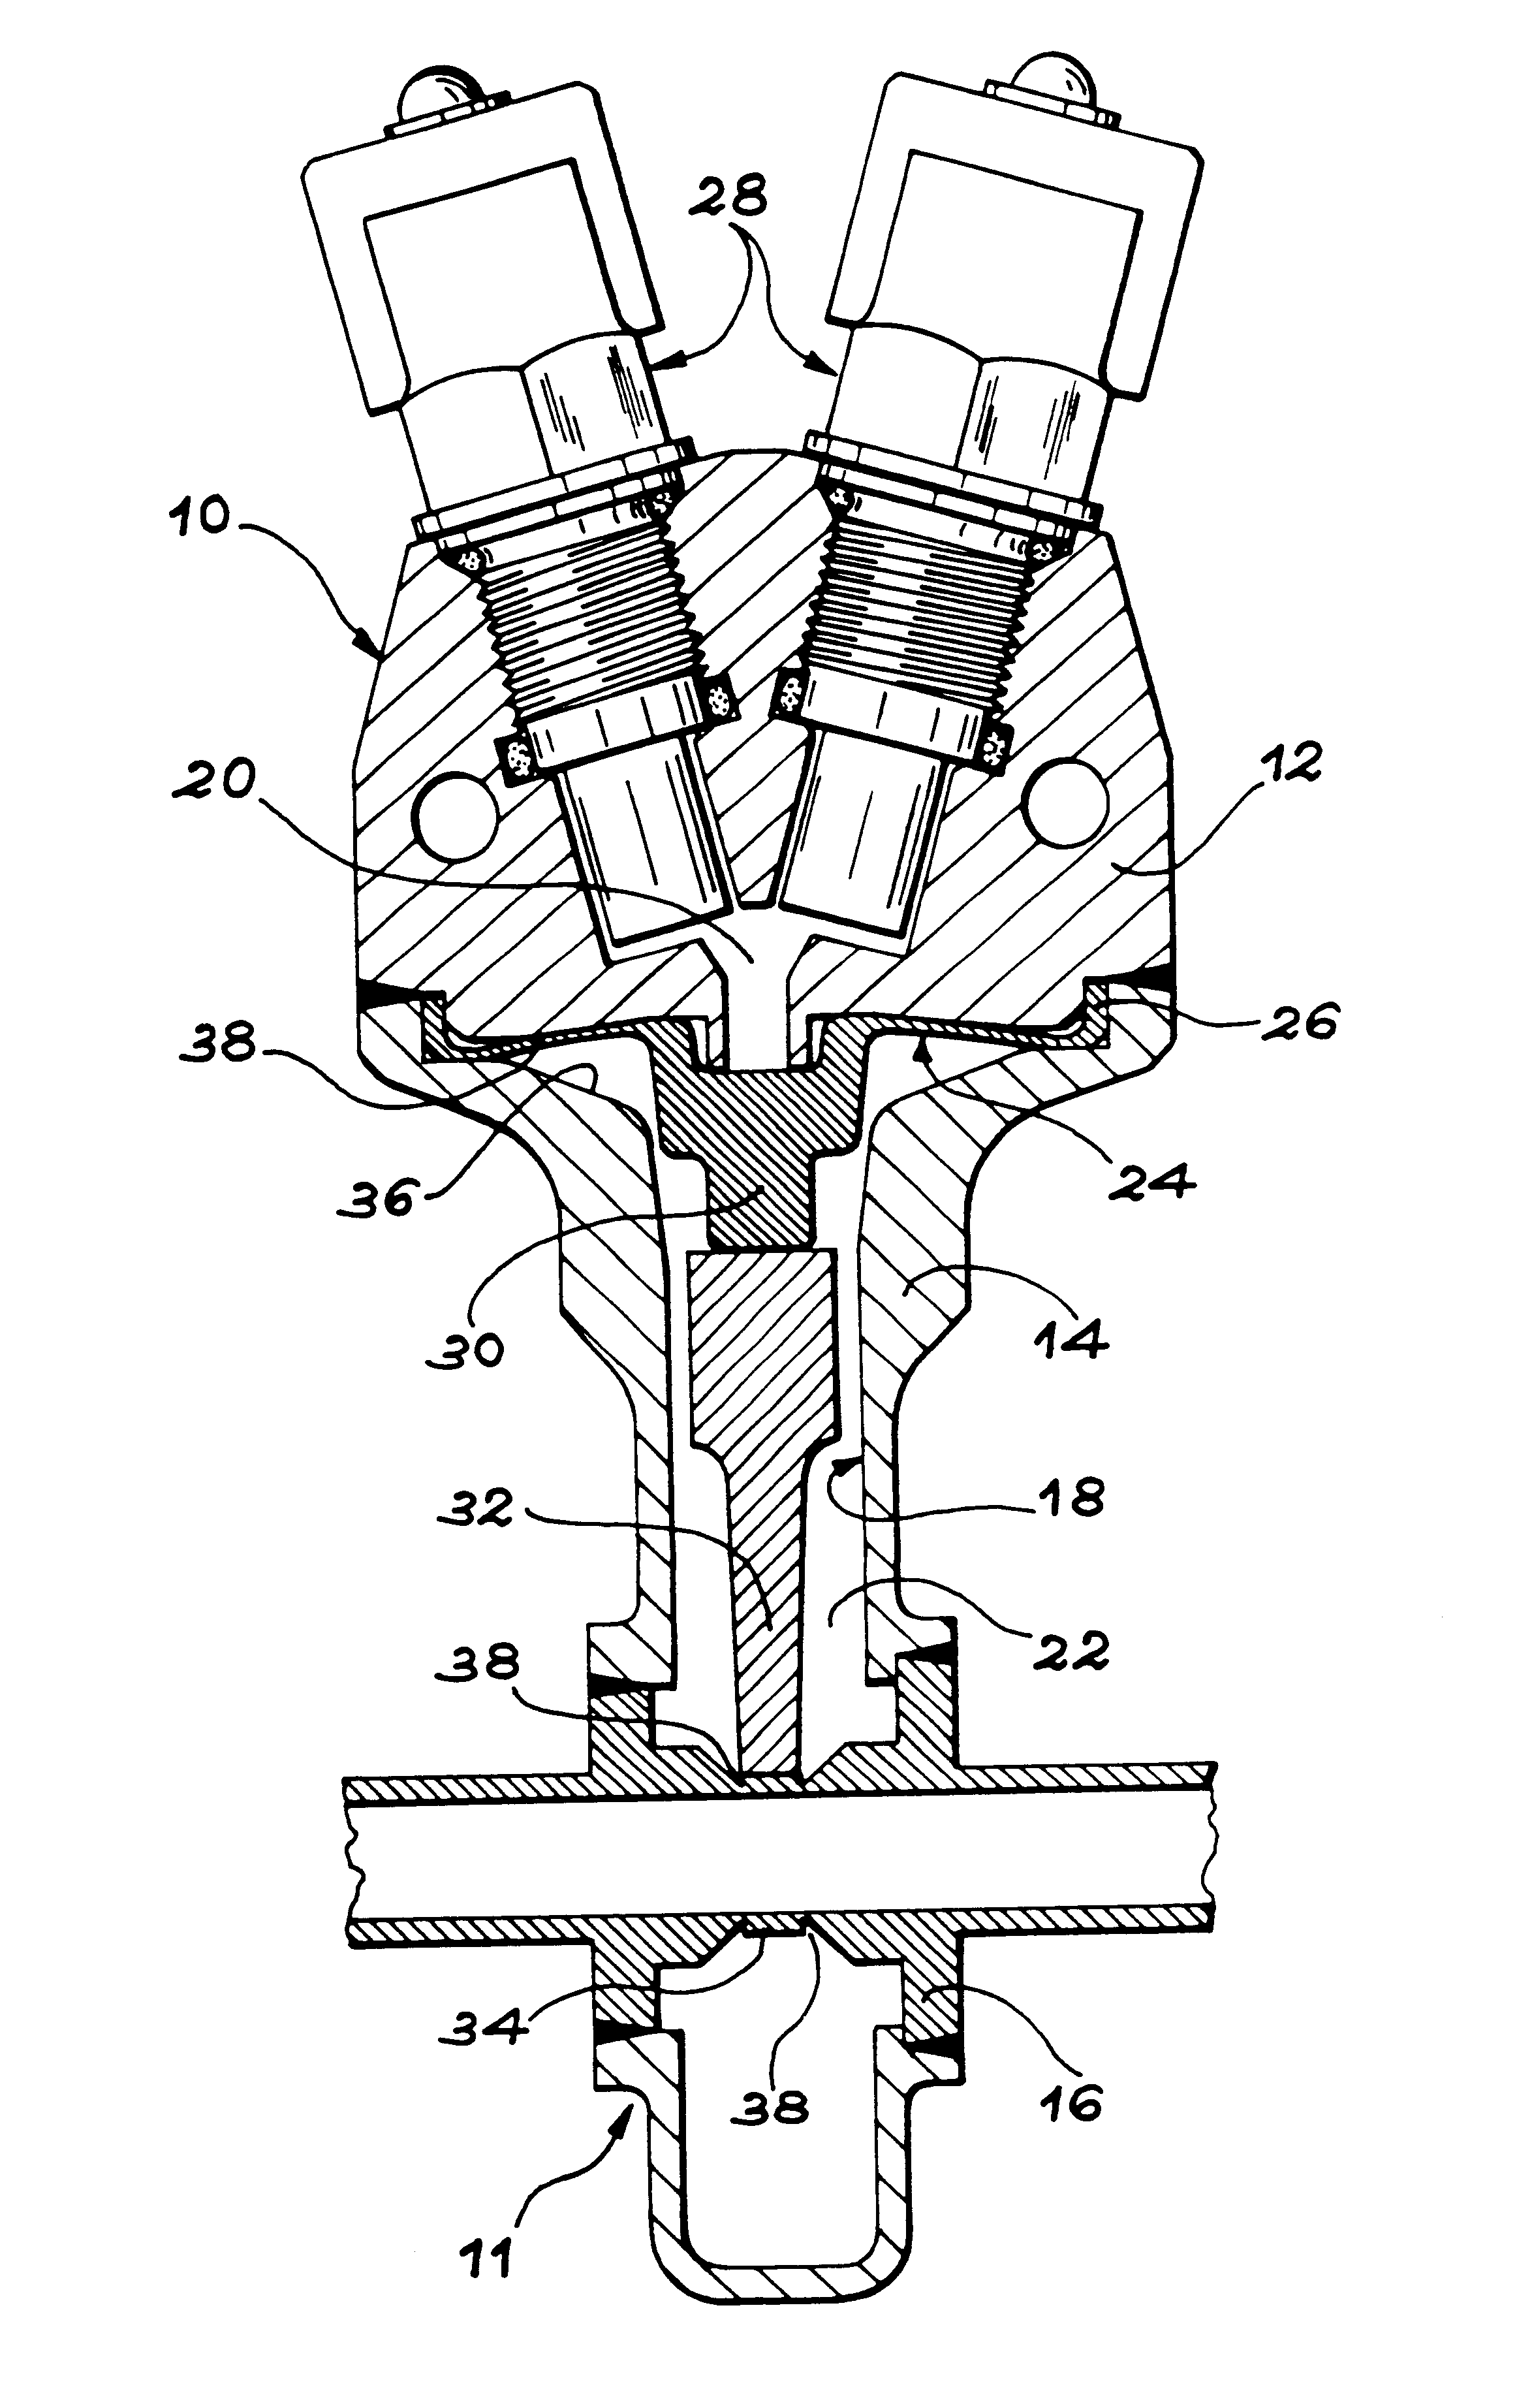 Pyrotechnic actuator with a deformable membrane